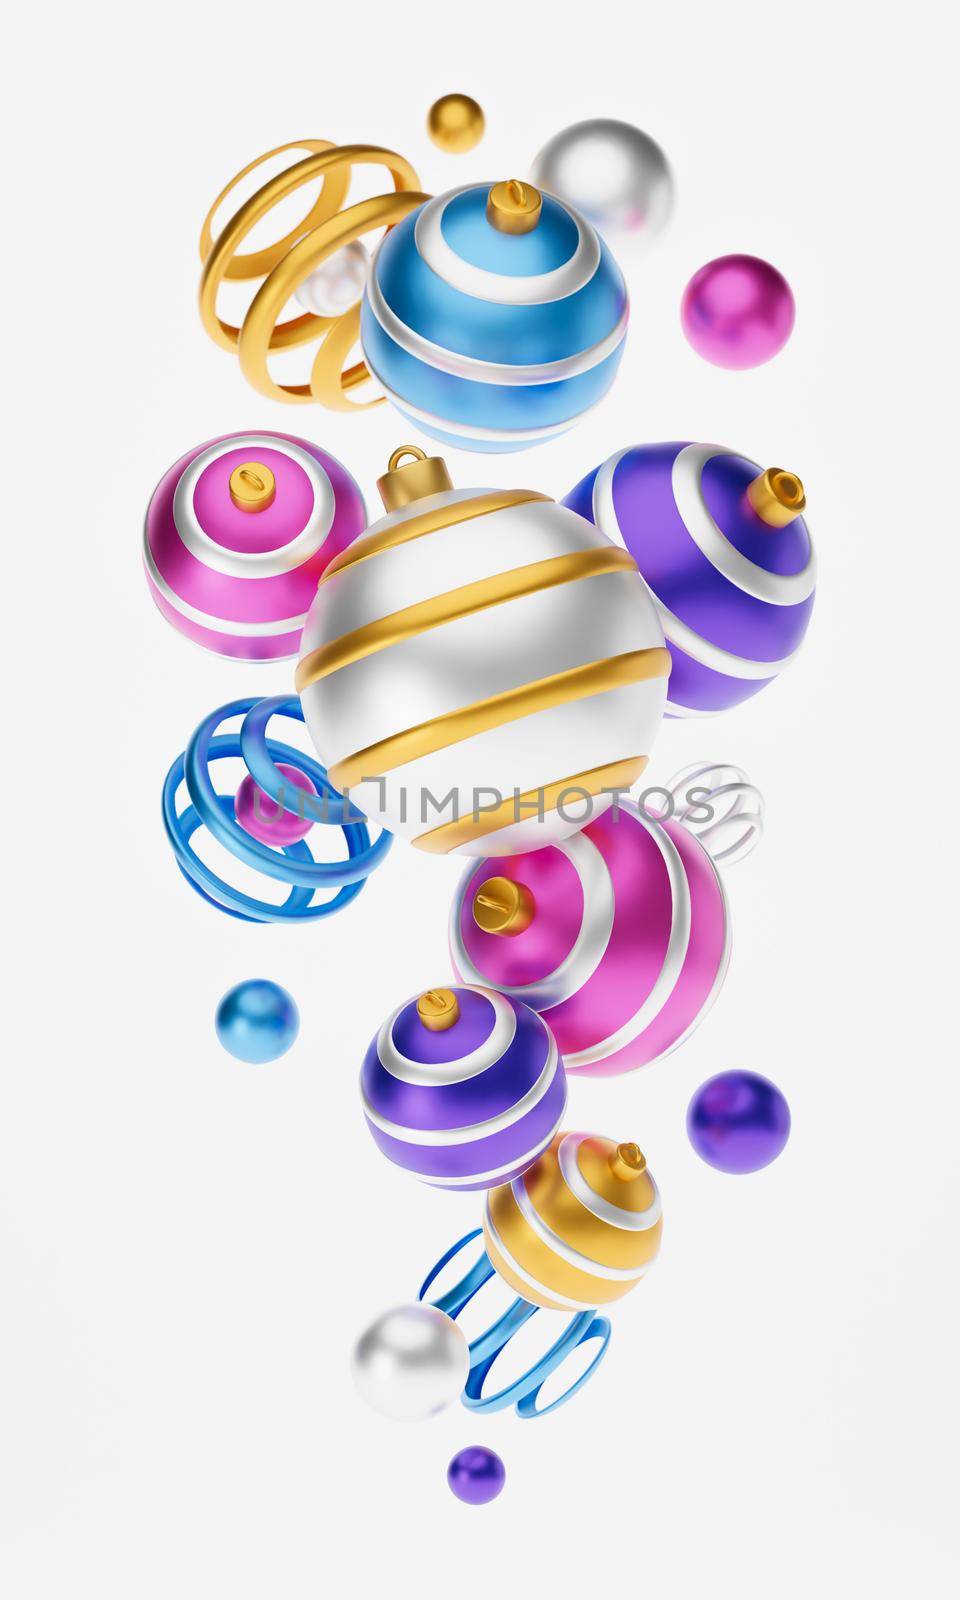 Merry christmas 3d greeting card or illustration banner. Merry Christmas and Happy New Year 3d render illustration card with ornate pink, blue, yellow xmas balls. Winter decoration xmas minimal design by lunarts